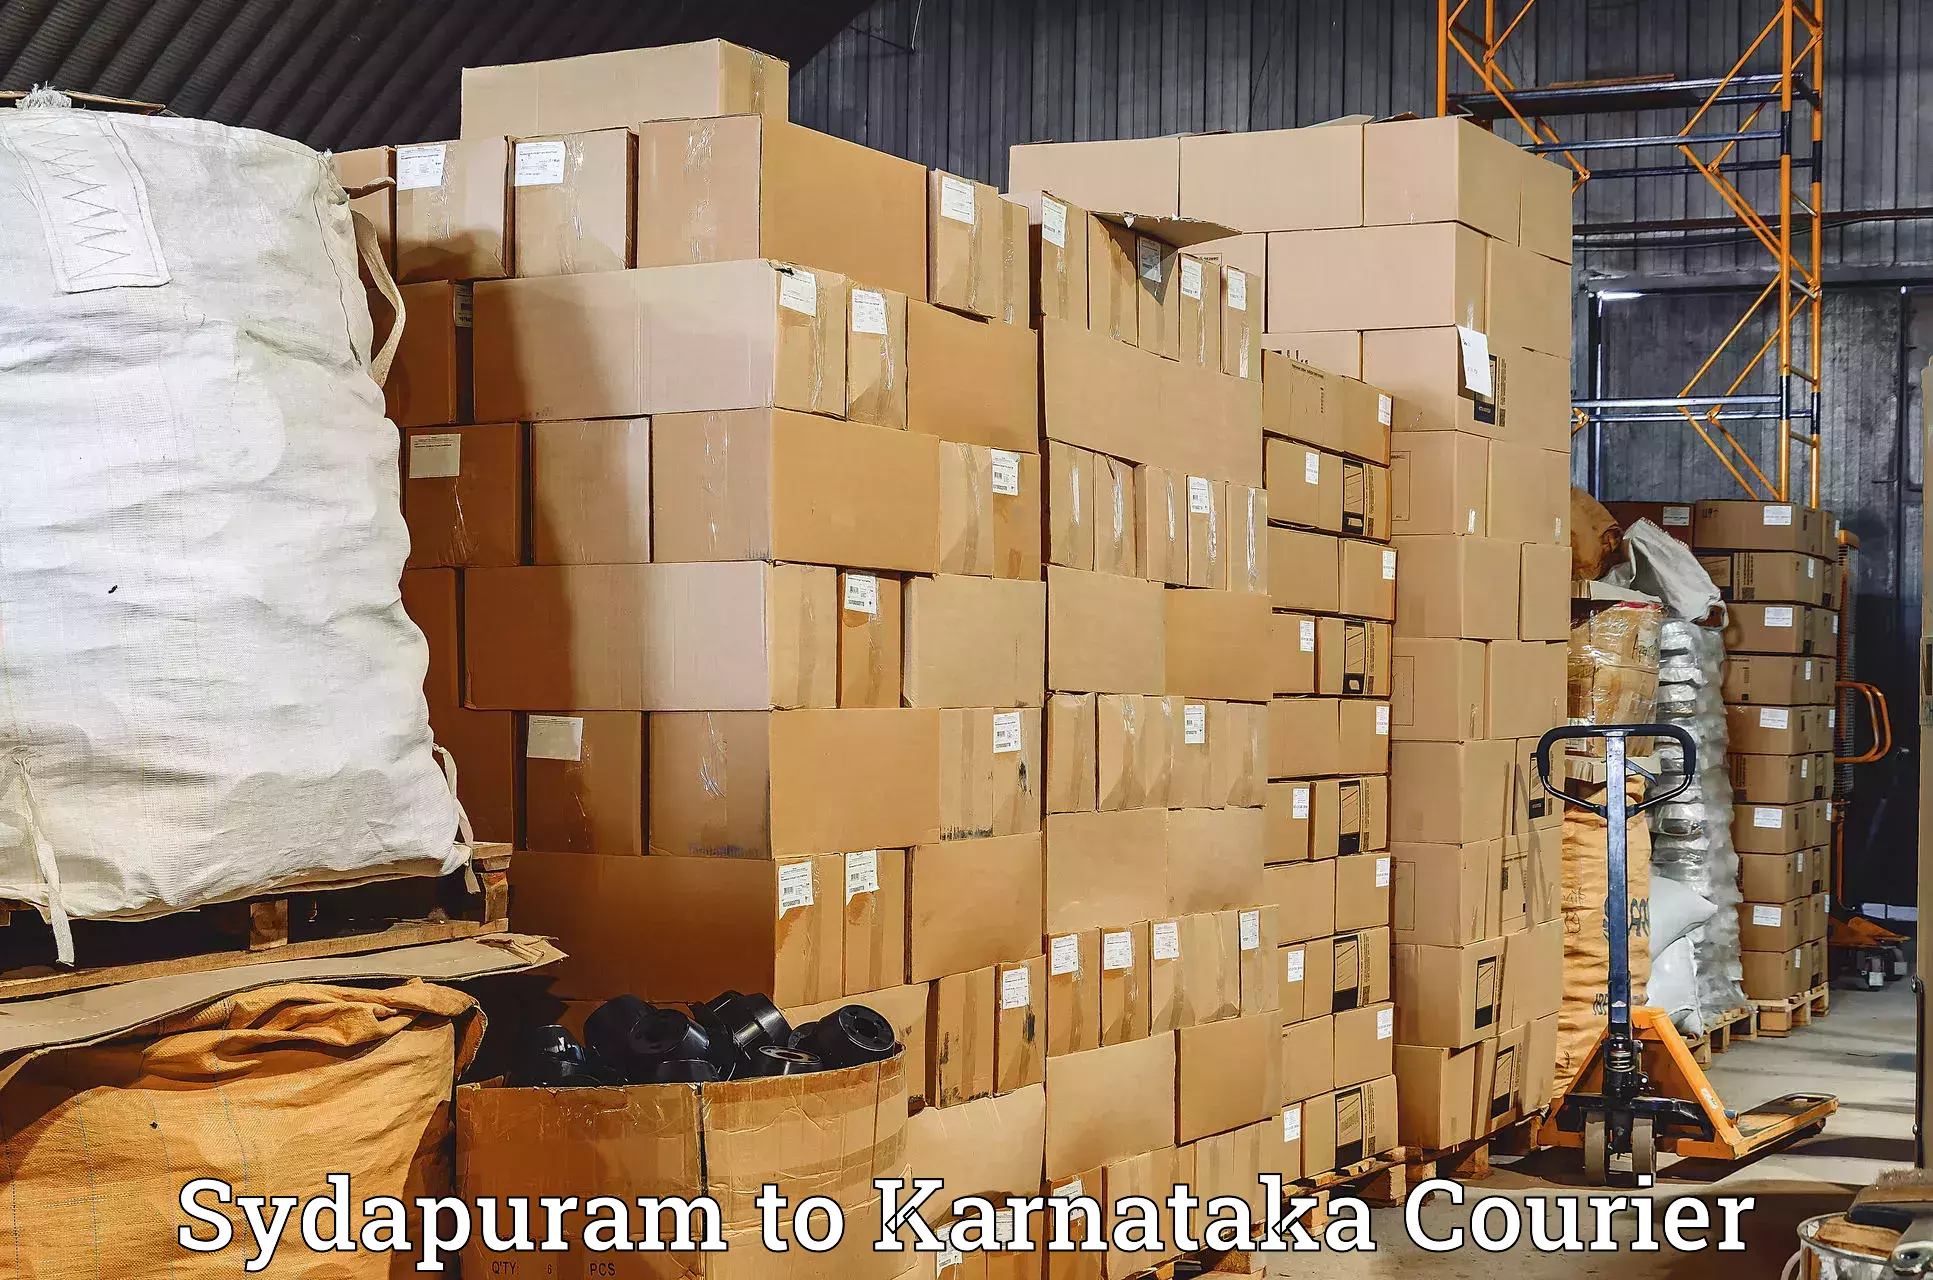 State-of-the-art courier technology Sydapuram to Chittapur